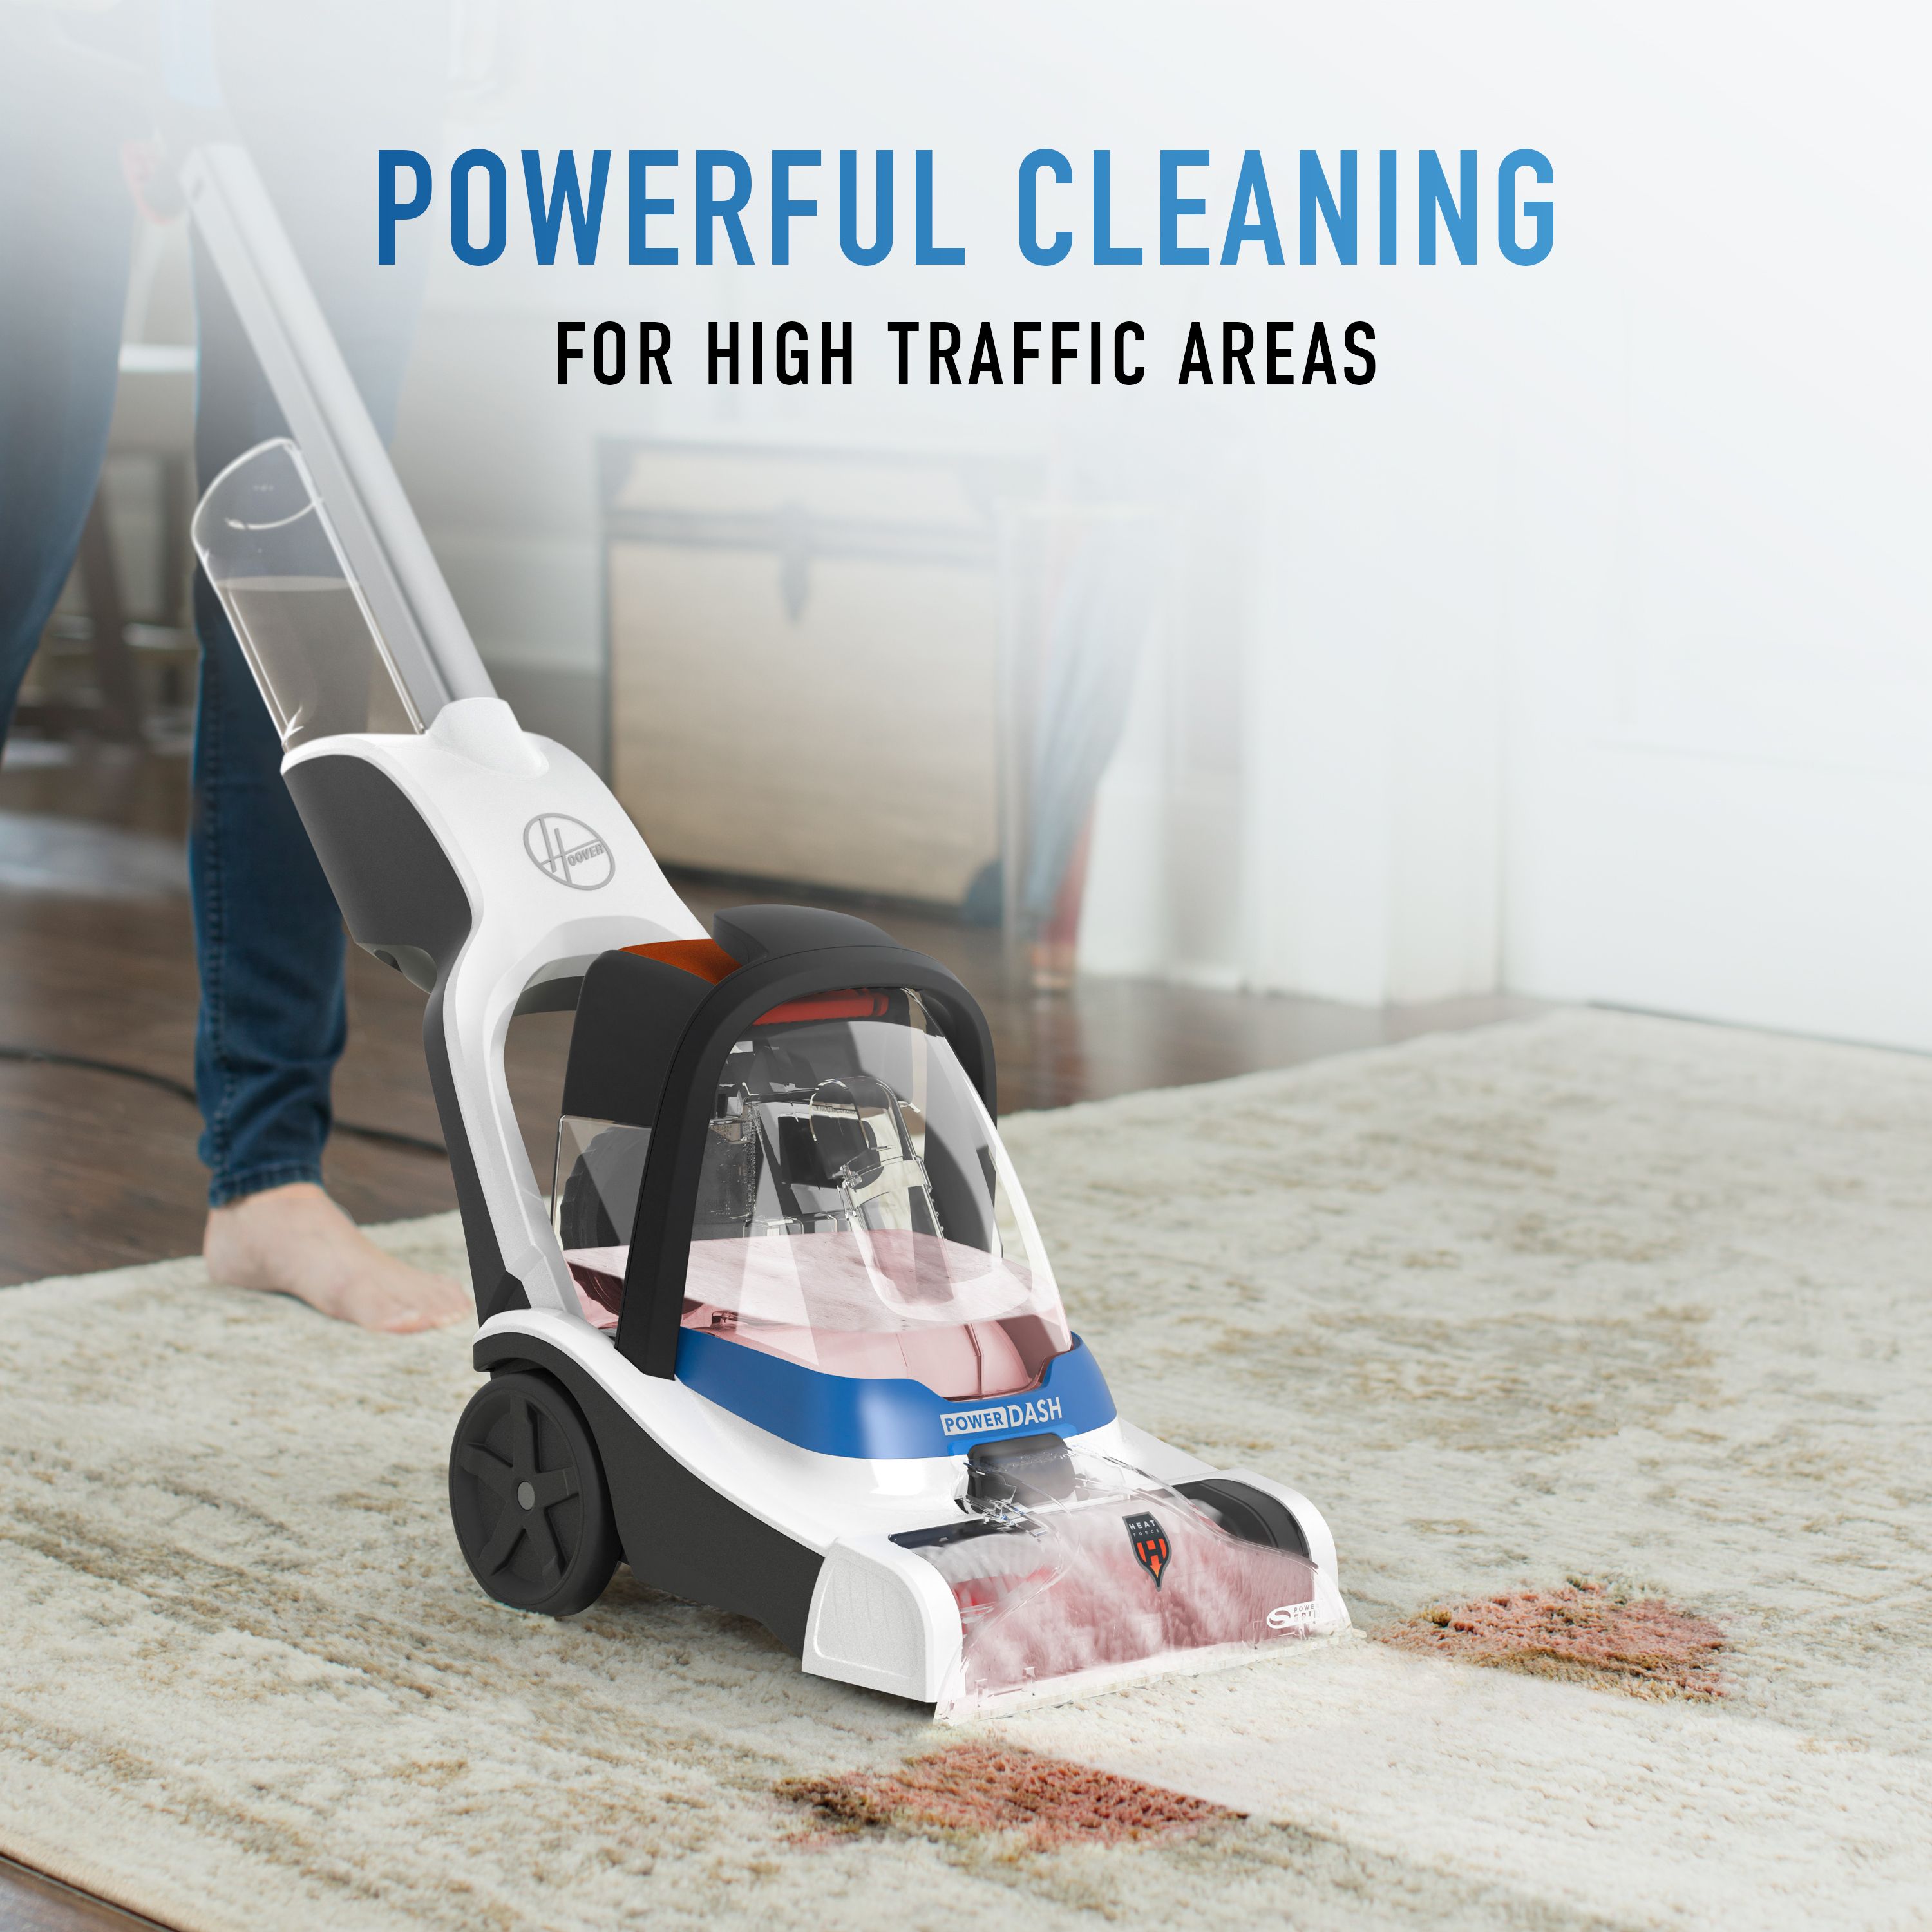 Hoover PowerDash Pet Compact Carpet Cleaner with Antimicrobial Pet Brushes FH50710 - image 5 of 16